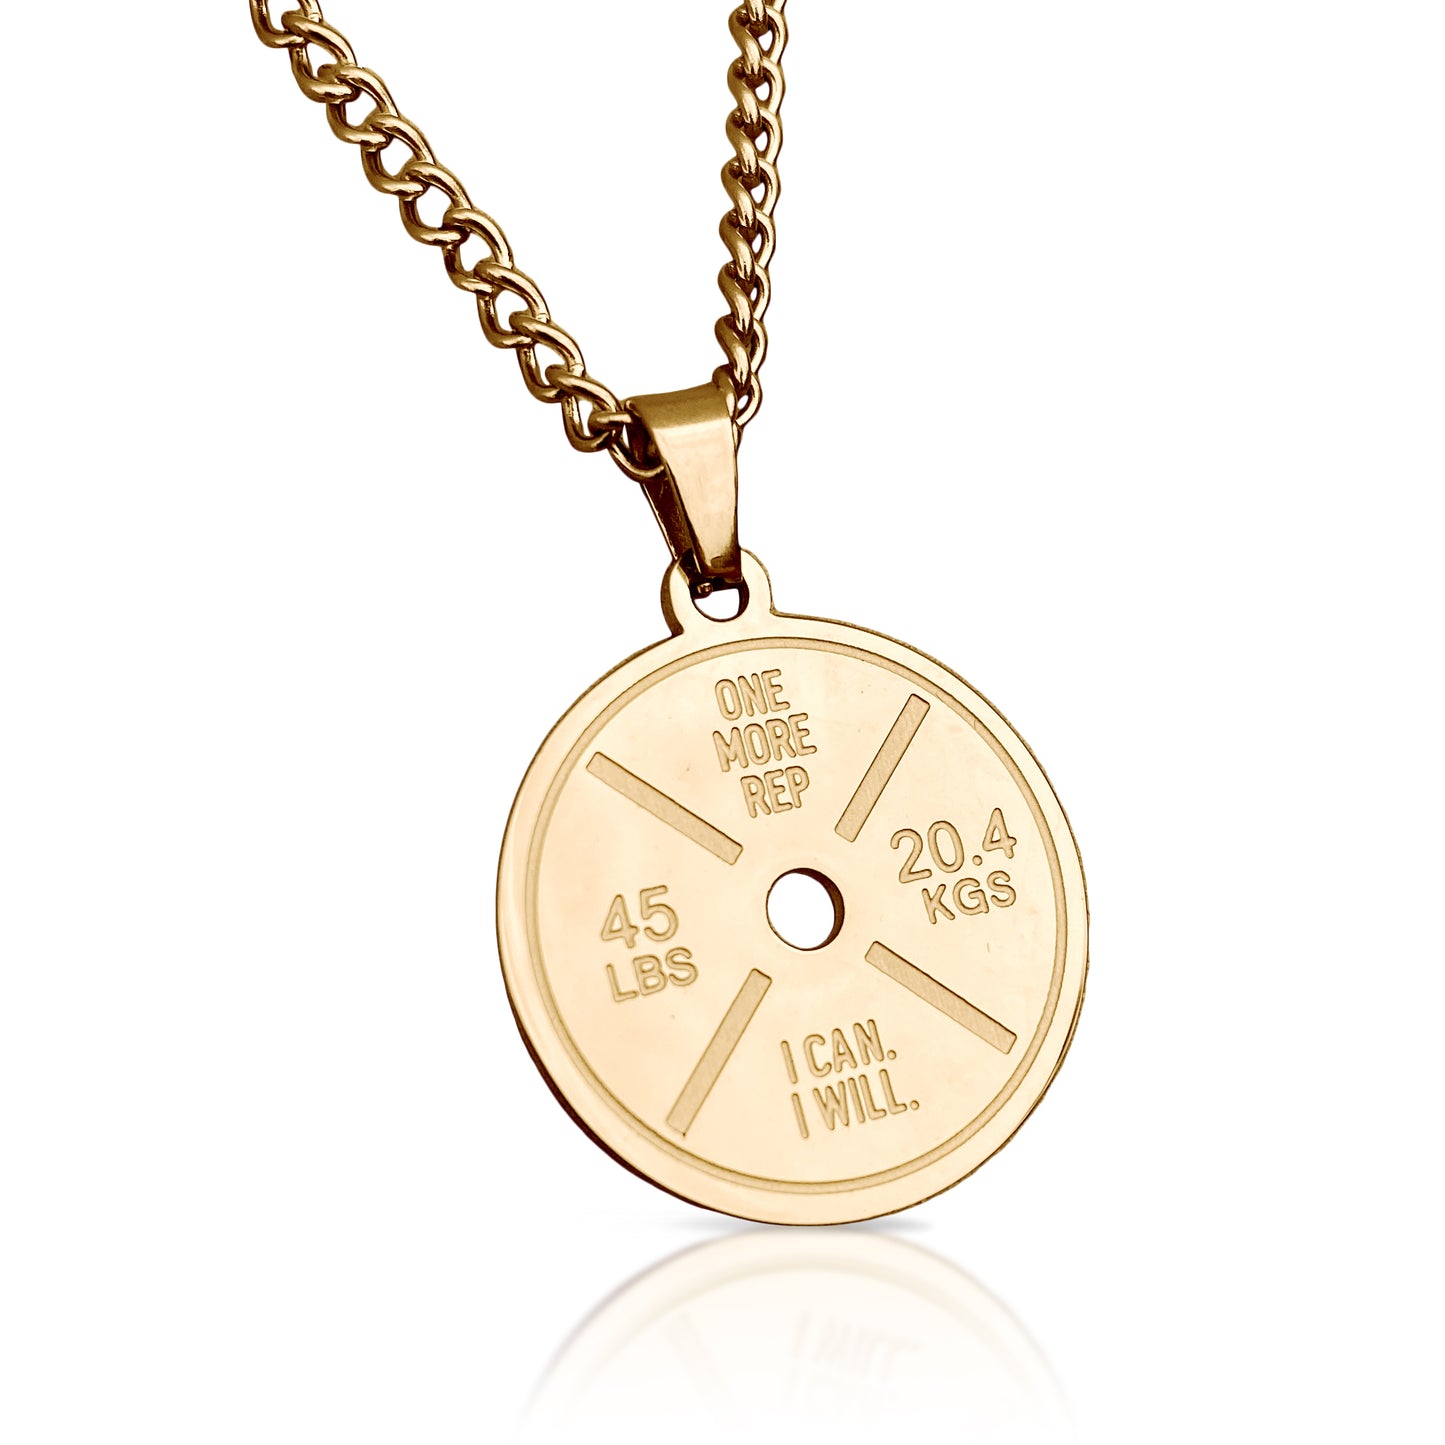 Barbell Plate Pendant With Chain Necklace - 14K Gold Plated Stainless Steel